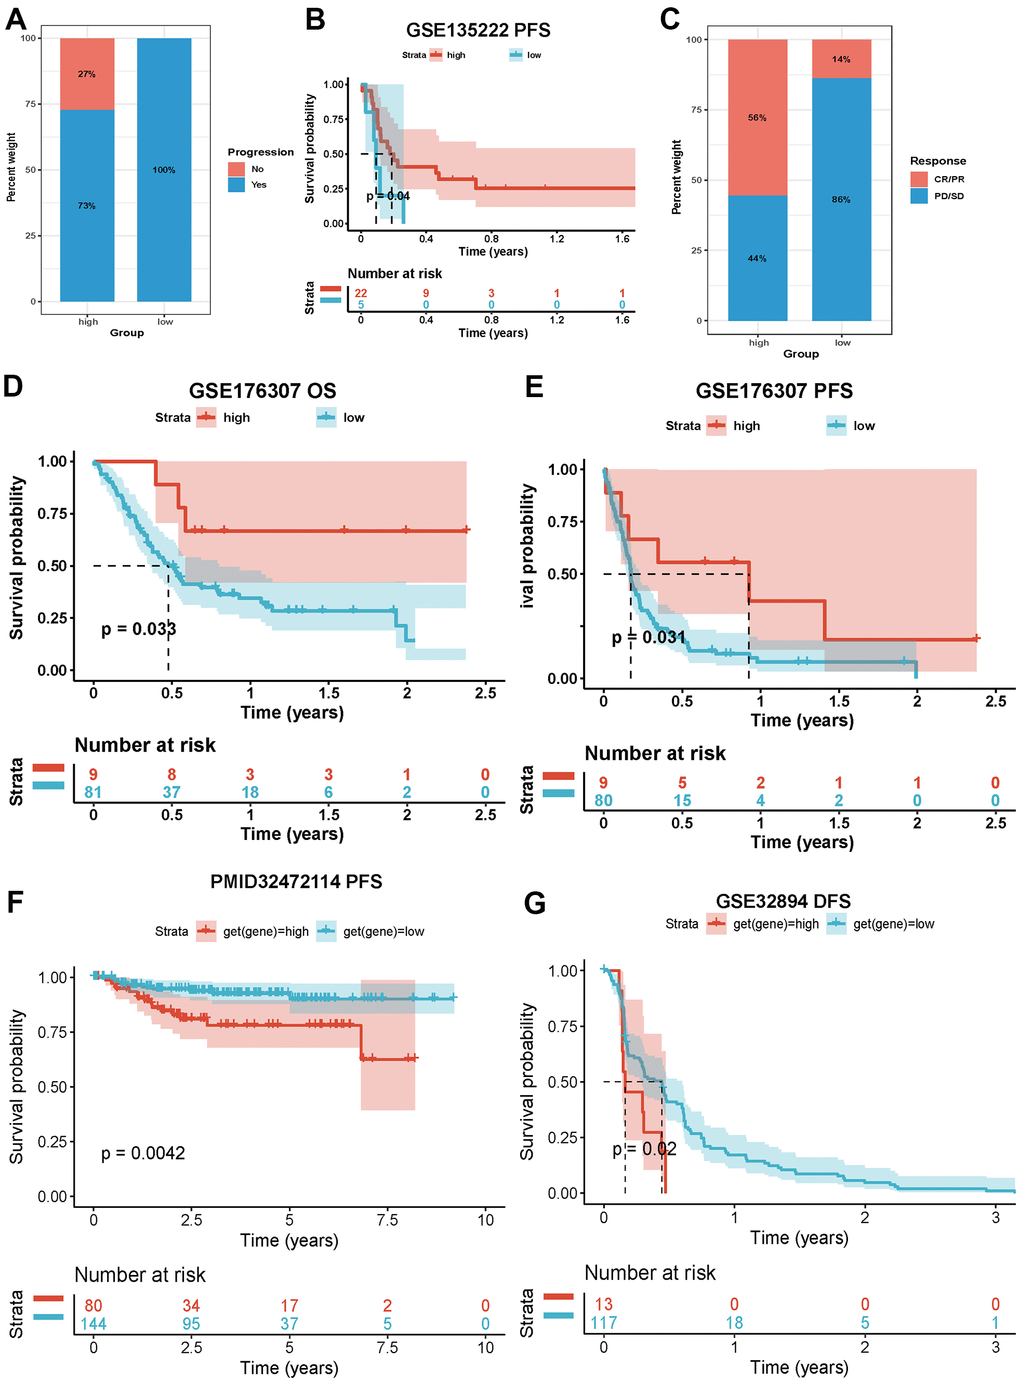 Impacts of NPS on immunotherapy. (A, B) Associations between NPS and immune response and PFS in advanced non-small cell lung carcinoma patients who receiving immunotherapy. (C–E) Associations between NPS and immune response, OS and PFS in metastatic urothelial cancer patients who receiving immunotherapy. (F) Associations between NPS and PFS in KIRC patients who receiving immunotherapy. (G) Associations between NPS and PFS in urothelium carcinoma patients who receiving immunotherapy.